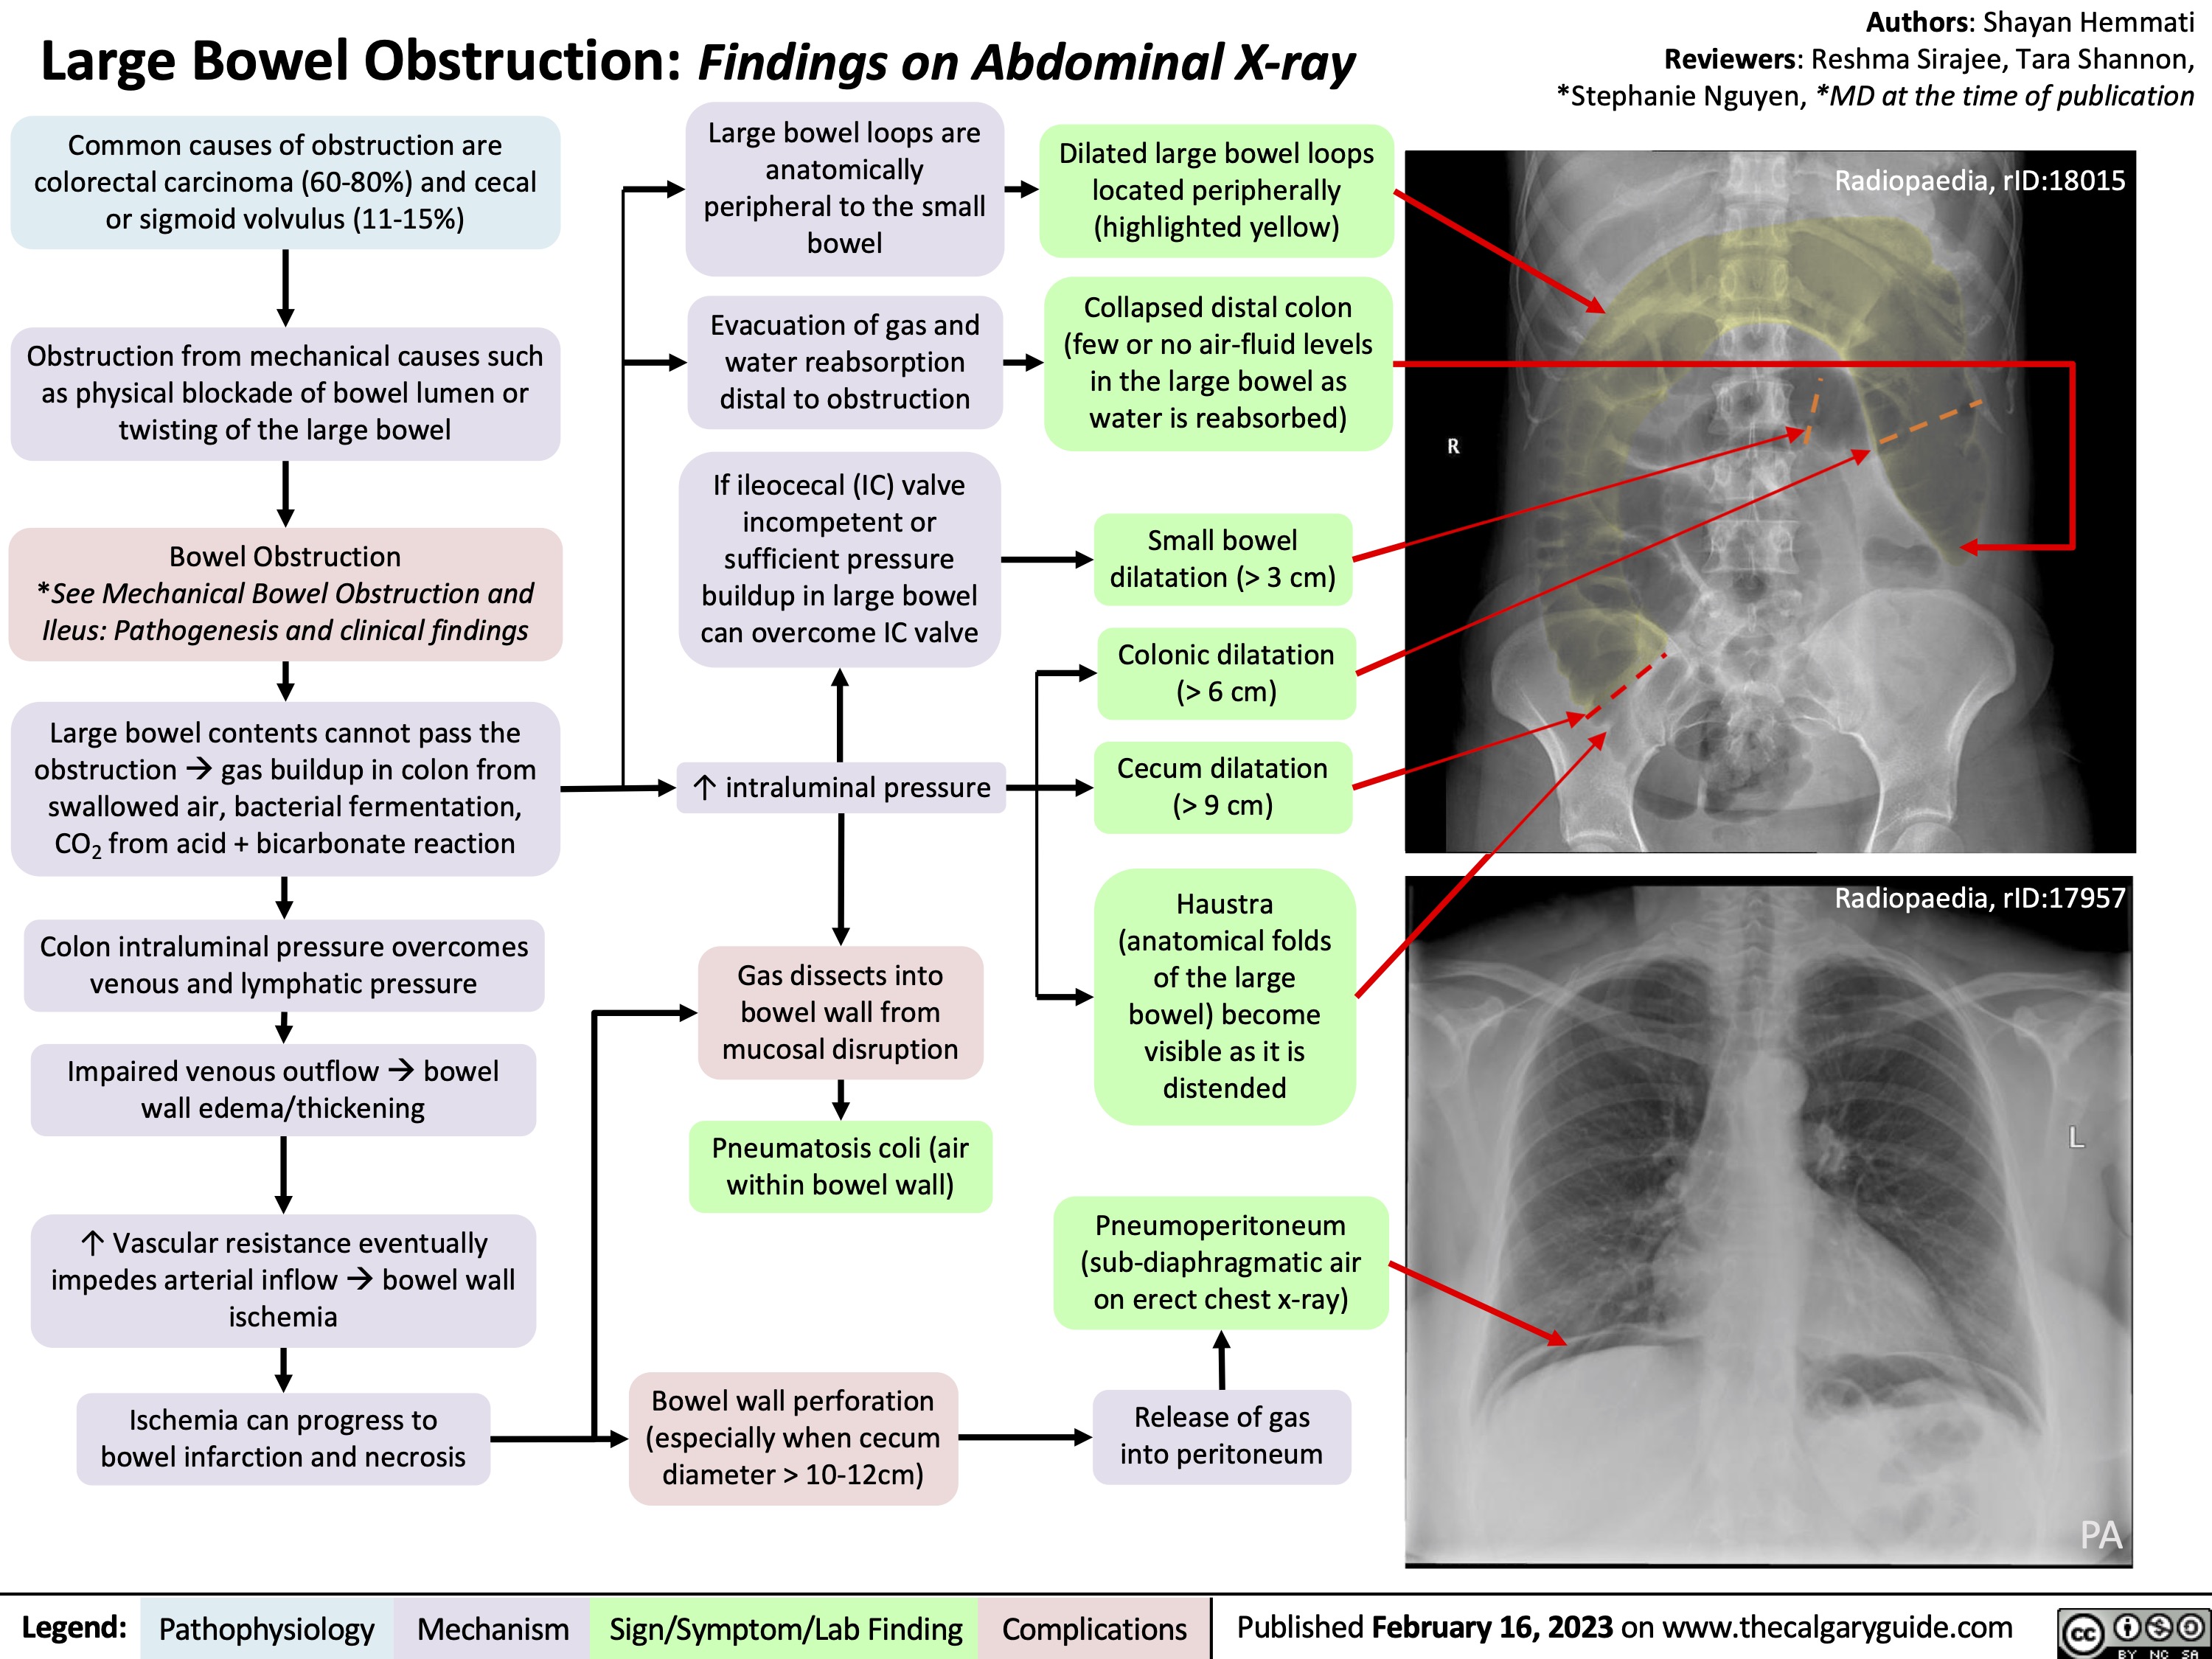 Large Bowel Obstruction: Findings on Abdominal X-ray
Authors: Shayan Hemmati Reviewers: Reshma Sirajee, Tara Shannon, *Stephanie Nguyen, *MD at the time of publication
Radiopaedia, rID:18015
   Common causes of obstruction are colorectal carcinoma (60-80%) and cecal or sigmoid volvulus (11-15%)
Obstruction from mechanical causes such as physical blockade of bowel lumen or twisting of the large bowel
Bowel Obstruction
*See Mechanical Bowel Obstruction and Ileus: Pathogenesis and clinical findings
Large bowel contents cannot pass the obstructionàgas buildup in colon from swallowed air, bacterial fermentation, CO2 from acid + bicarbonate reaction
Colon intraluminal pressure overcomes venous and lymphatic pressure
Impaired venous outflowàbowel wall edema/thickening
↑ Vascular resistance eventually impedes arterial inflowàbowel wall ischemia
Ischemia can progress to bowel infarction and necrosis
Large bowel loops are anatomically peripheral to the small bowel
Evacuation of gas and water reabsorption distal to obstruction
If ileocecal (IC) valve incompetent or sufficient pressure buildup in large bowel can overcome IC valve
↑ intraluminal pressure
Gas dissects into
bowel wall from mucosal disruption
Pneumatosis coli (air within bowel wall)
Bowel wall perforation (especially when cecum diameter > 10-12cm)
Dilated large bowel loops located peripherally (highlighted yellow)
Collapsed distal colon (few or no air-fluid levels in the large bowel as water is reabsorbed)
Small bowel dilatation (> 3 cm)
Colonic dilatation (> 6 cm)
Cecum dilatation (> 9 cm)
Haustra (anatomical folds of the large bowel) become visible as it is distended
Pneumoperitoneum (sub-diaphragmatic air on erect chest x-ray)
Release of gas into peritoneum
PA
Radiopaedia, rID:17957
                                    PA
 Legend:
 Pathophysiology
Mechanism
Sign/Symptom/Lab Finding
 Complications
Published February 16, 2023 on www.thecalgaryguide.com
    